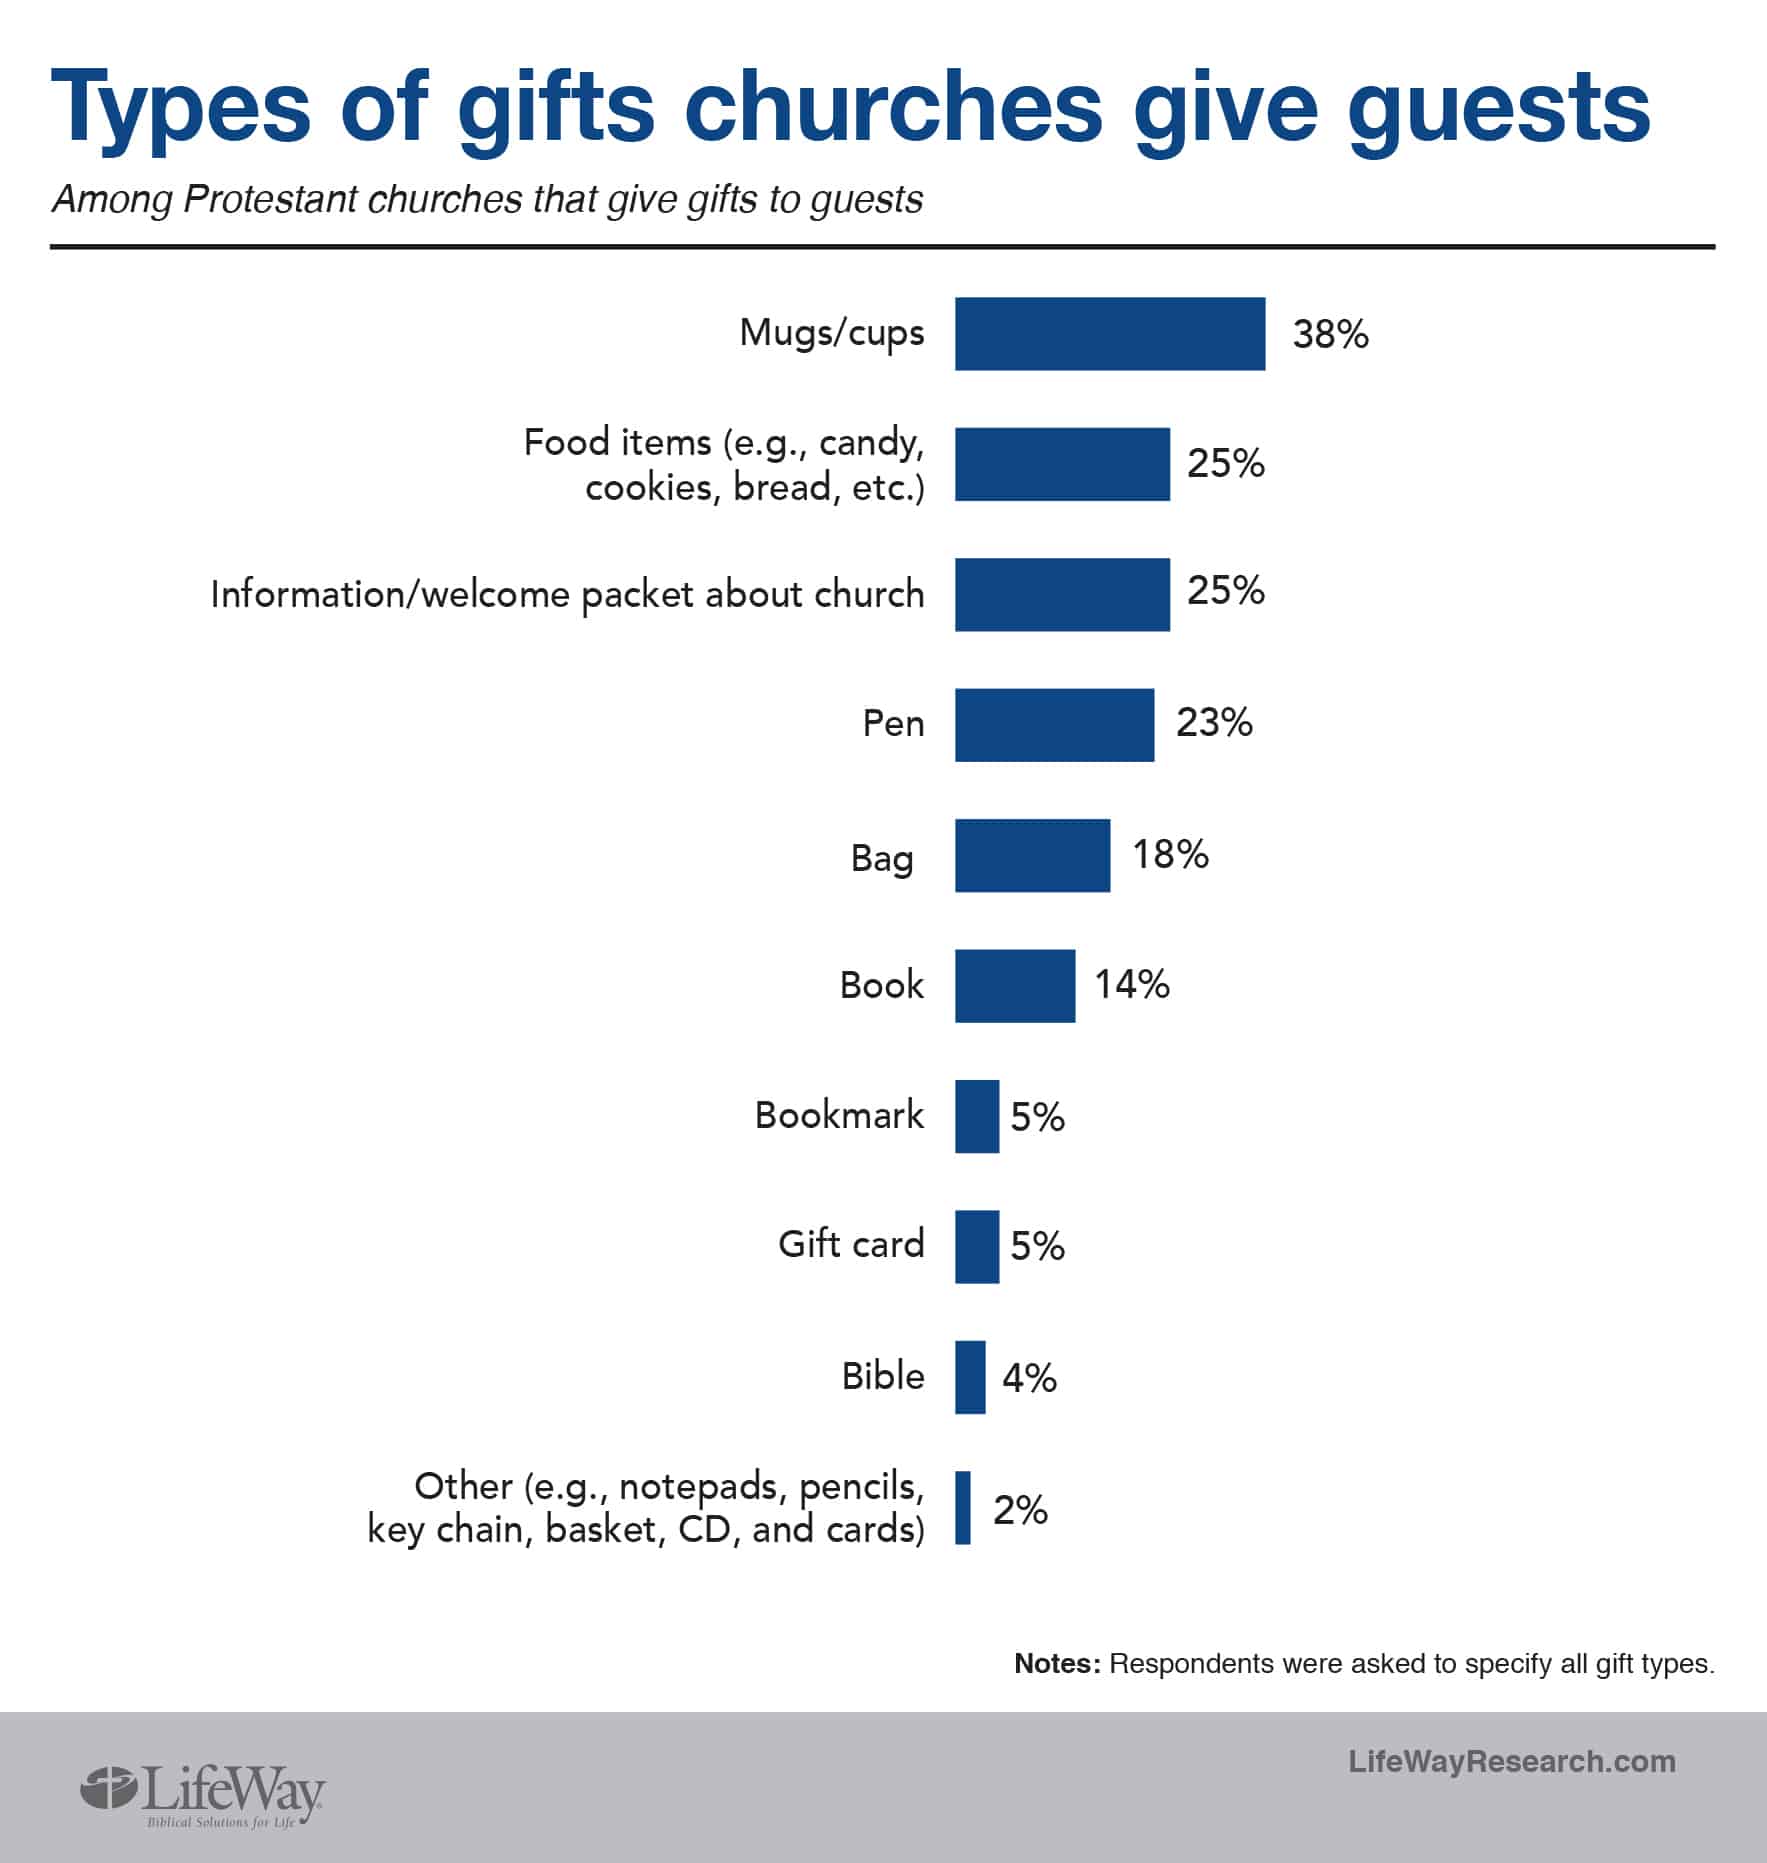 BP Gifts churches give guests